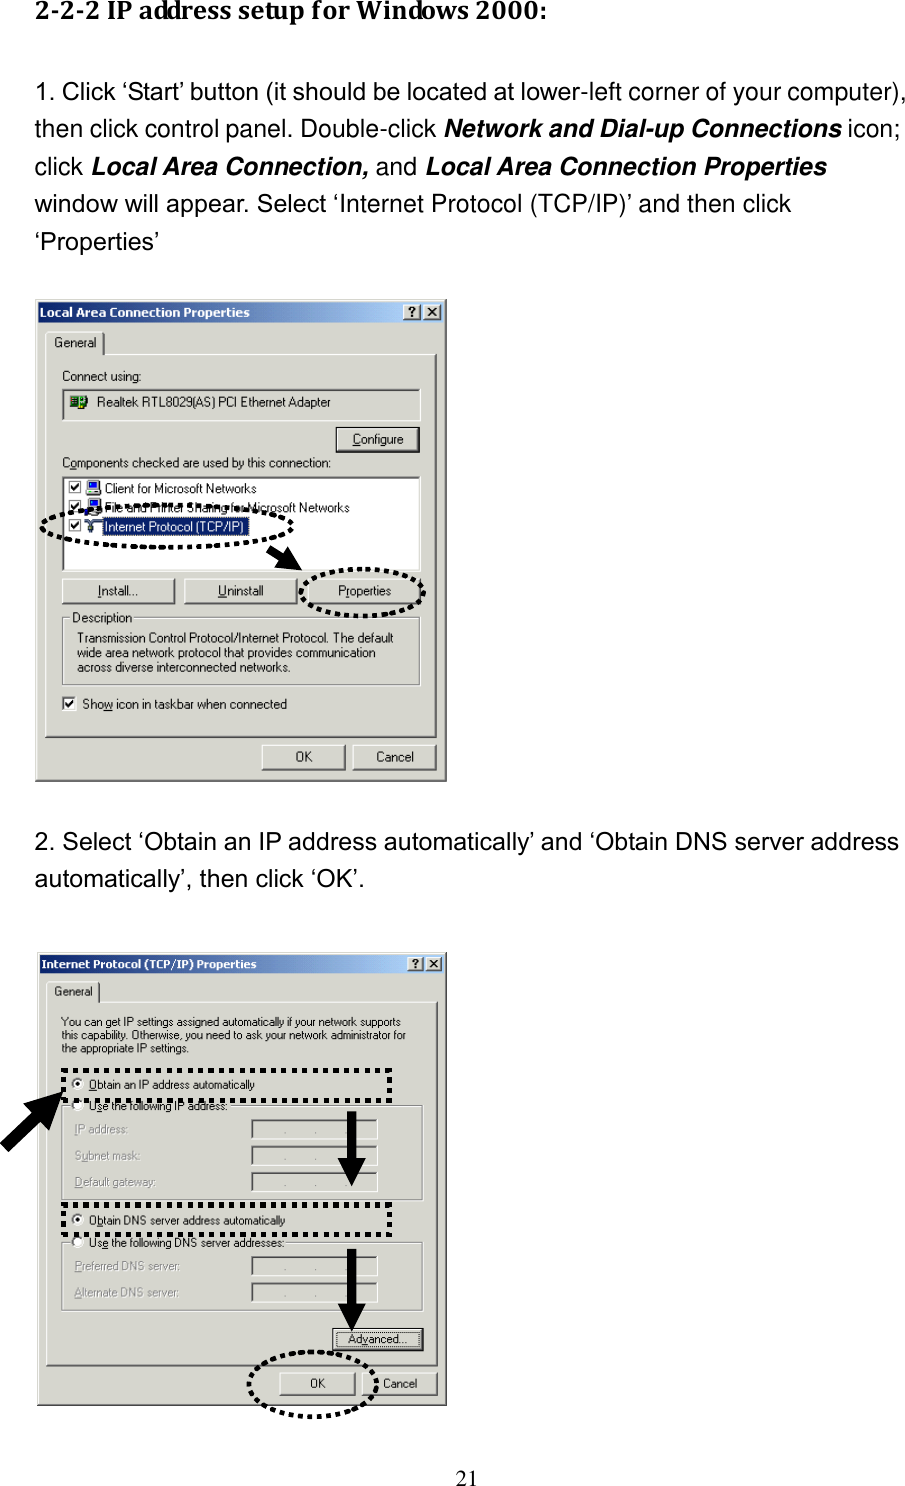 21 2-2-2 IP address setup for Windows 2000:  1. Click „Start‟ button (it should be located at lower-left corner of your computer), then click control panel. Double-click Network and Dial-up Connections icon; click Local Area Connection, and Local Area Connection Properties window will appear. Select „Internet Protocol (TCP/IP)‟ and then click „Properties‟      2. Select „Obtain an IP address automatically‟ and „Obtain DNS server address automatically‟, then click „OK‟.   